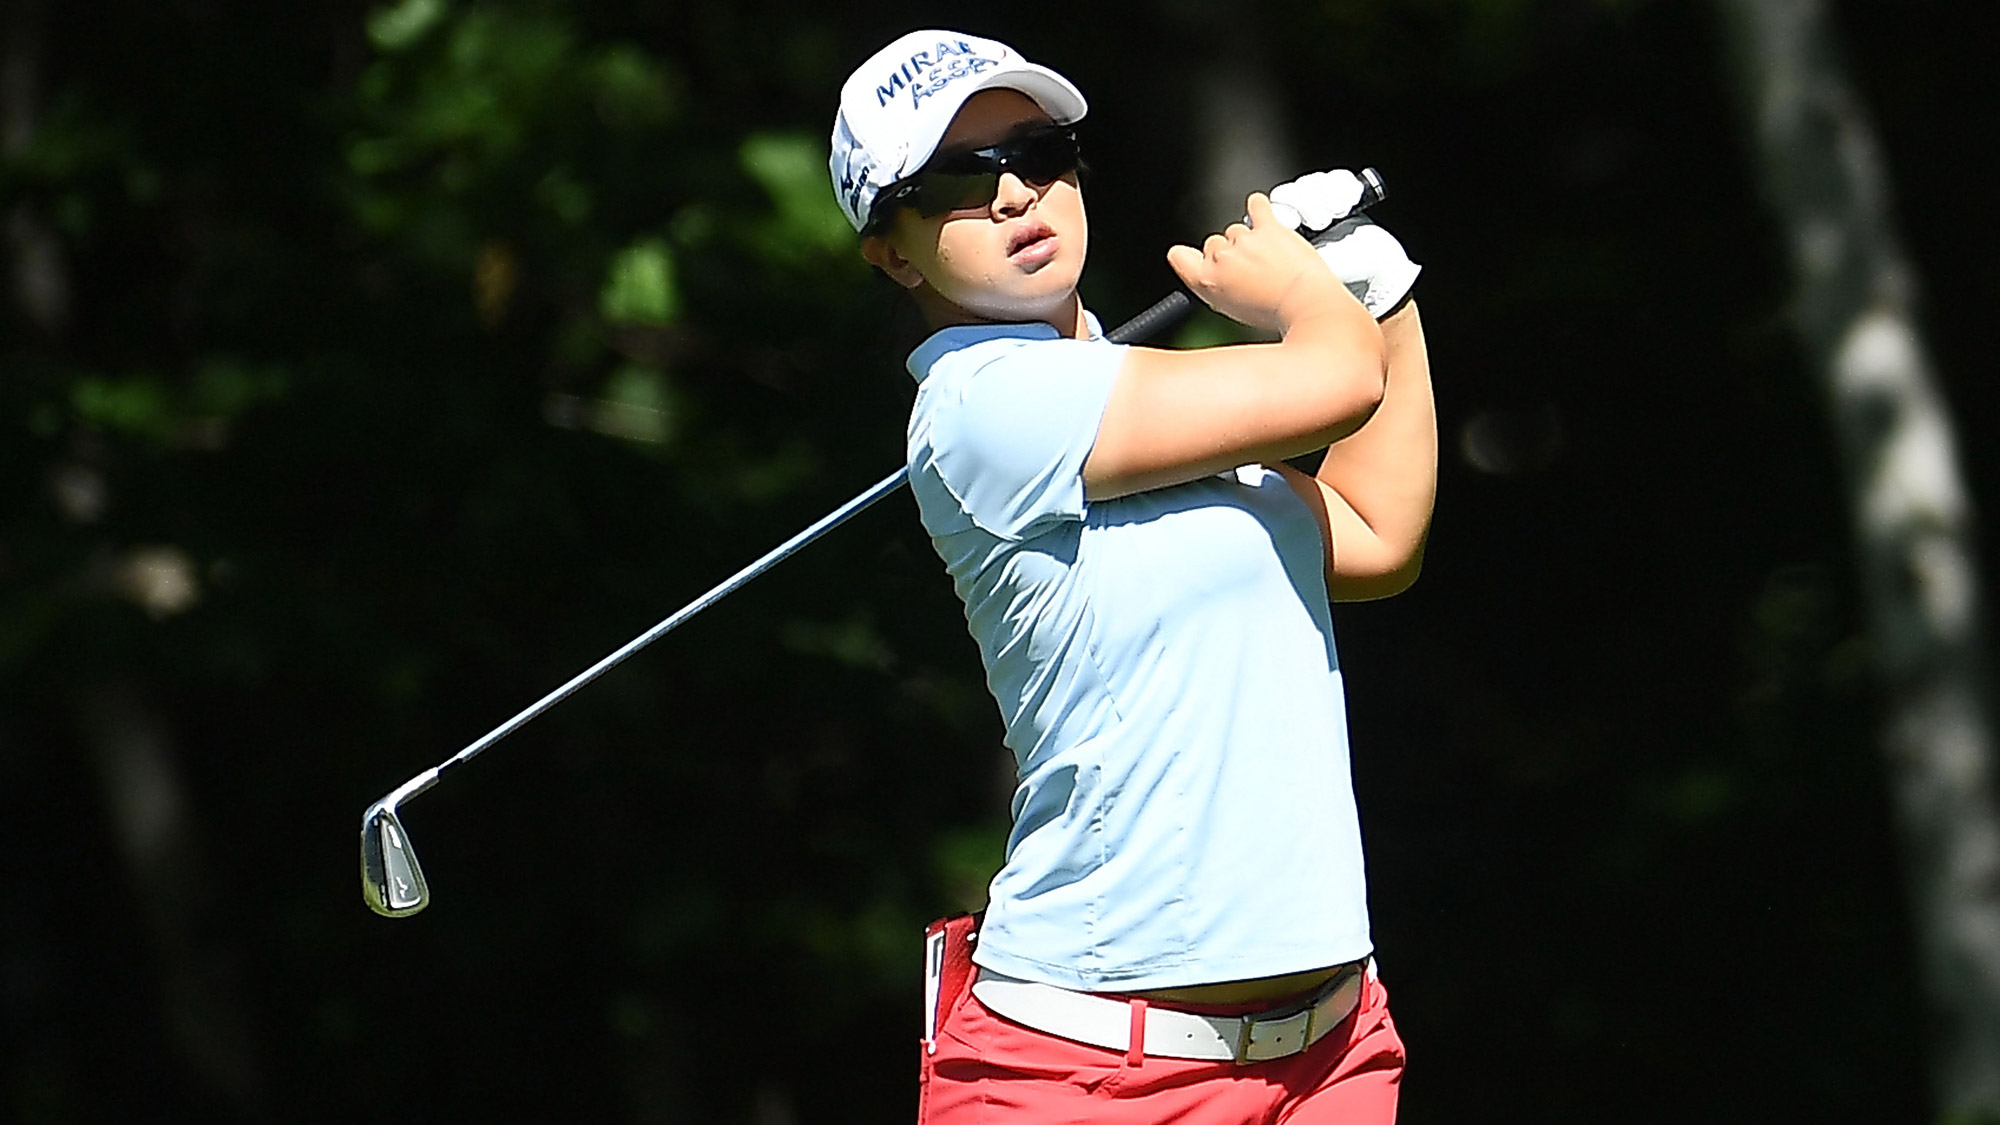 Sei Young Kim Swings on Sunday at the Thornberry Creek LPGA Classic